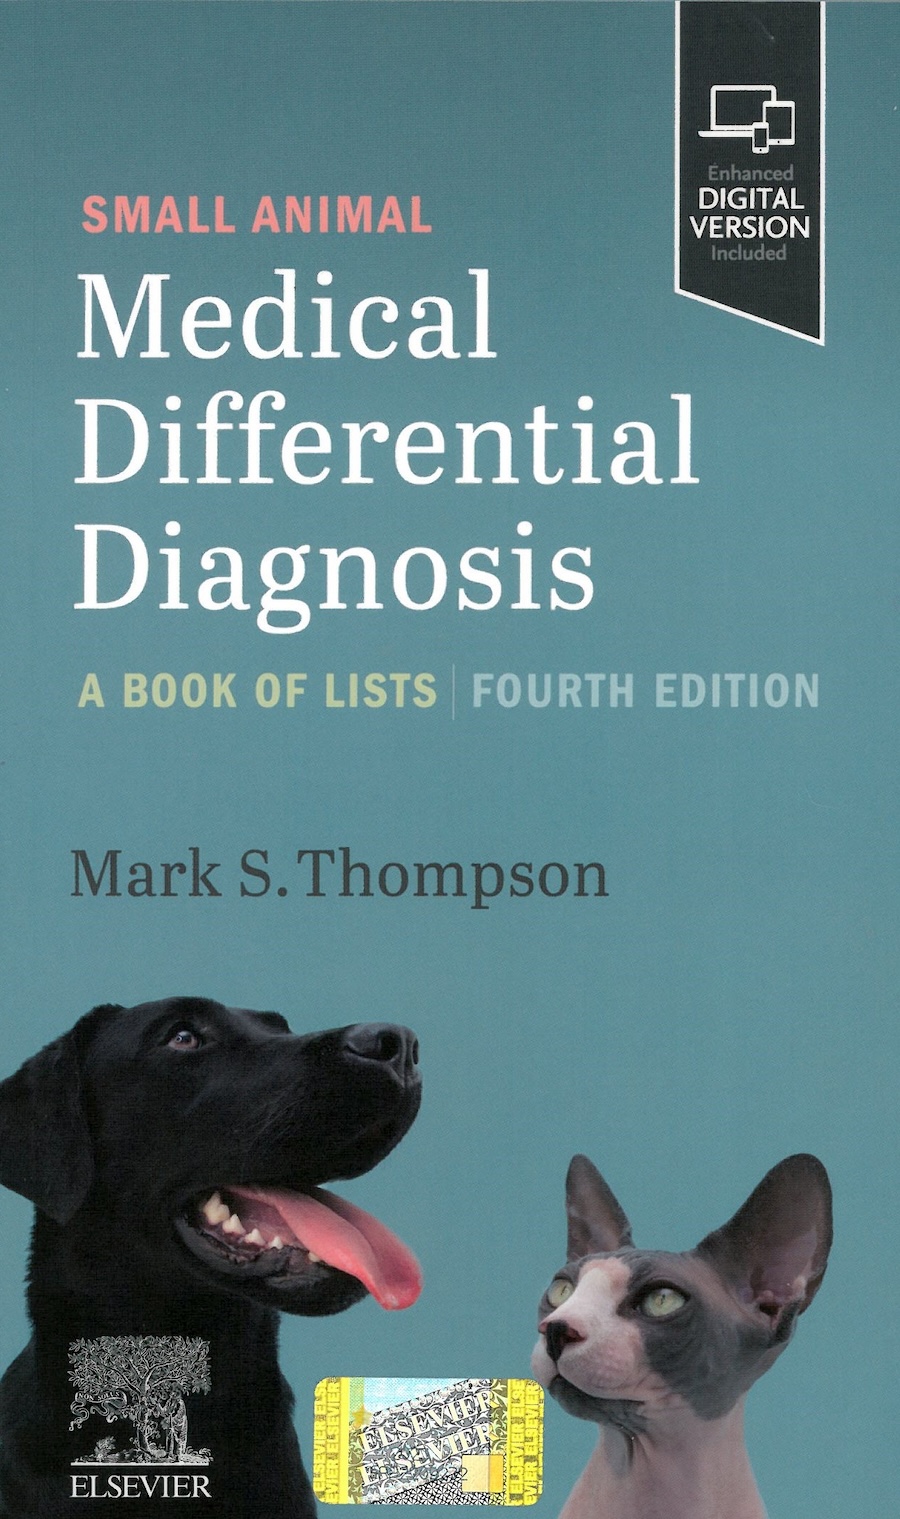 Small animal medical differential diagnosis - A book of lists